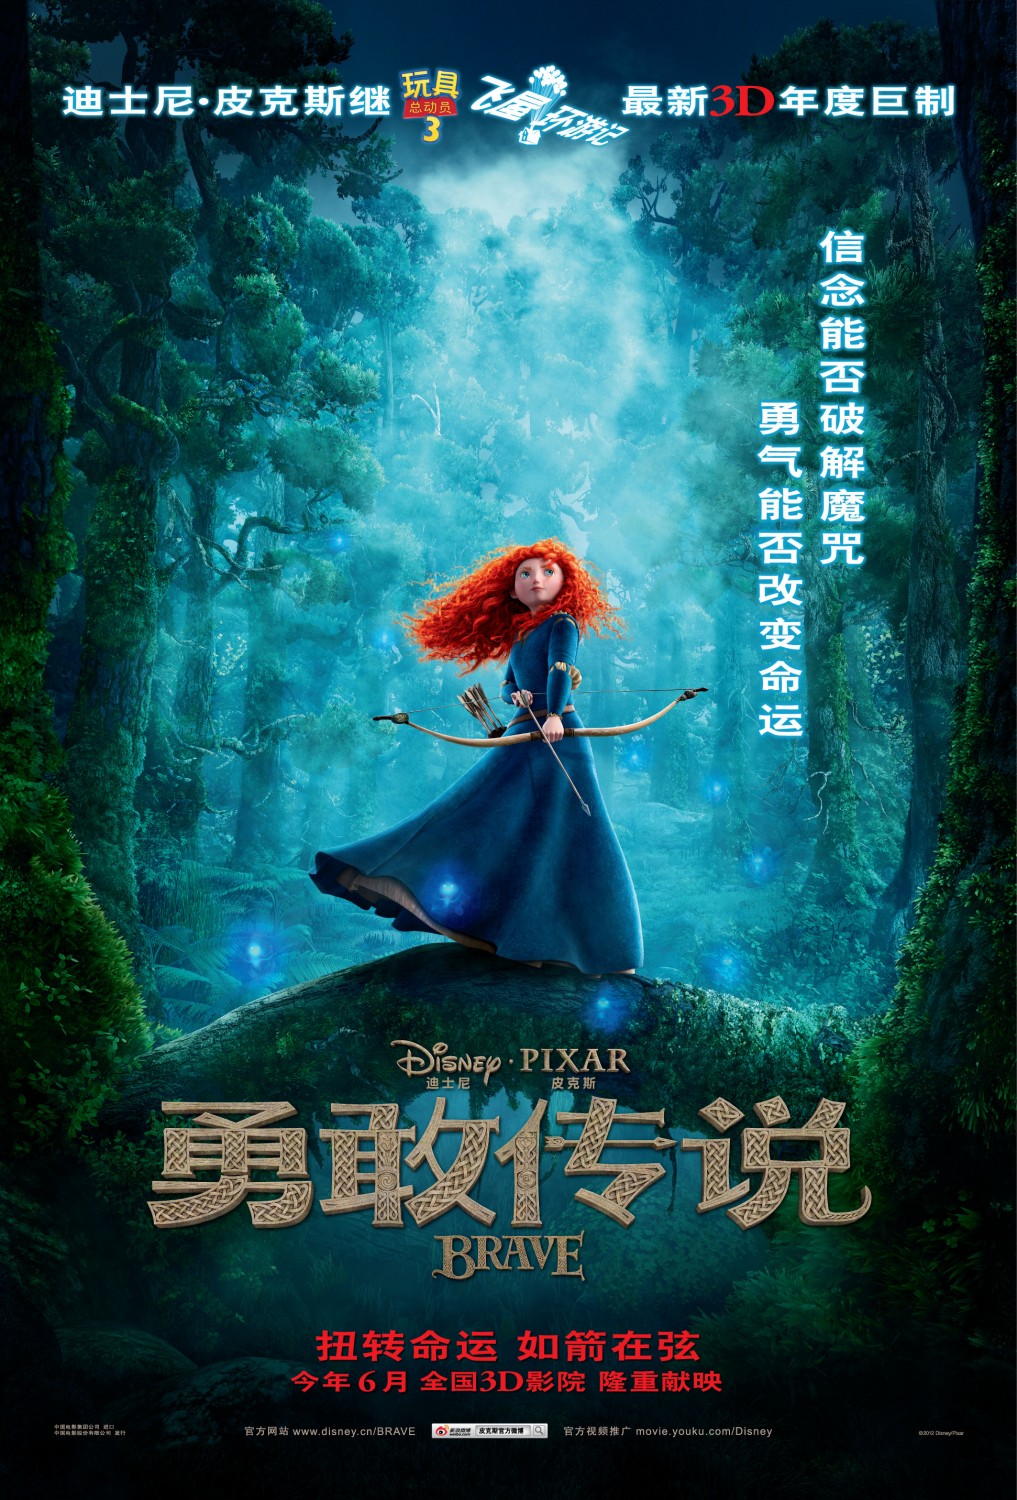 Extra Large Movie Poster Image for Brave (#4 of 17)